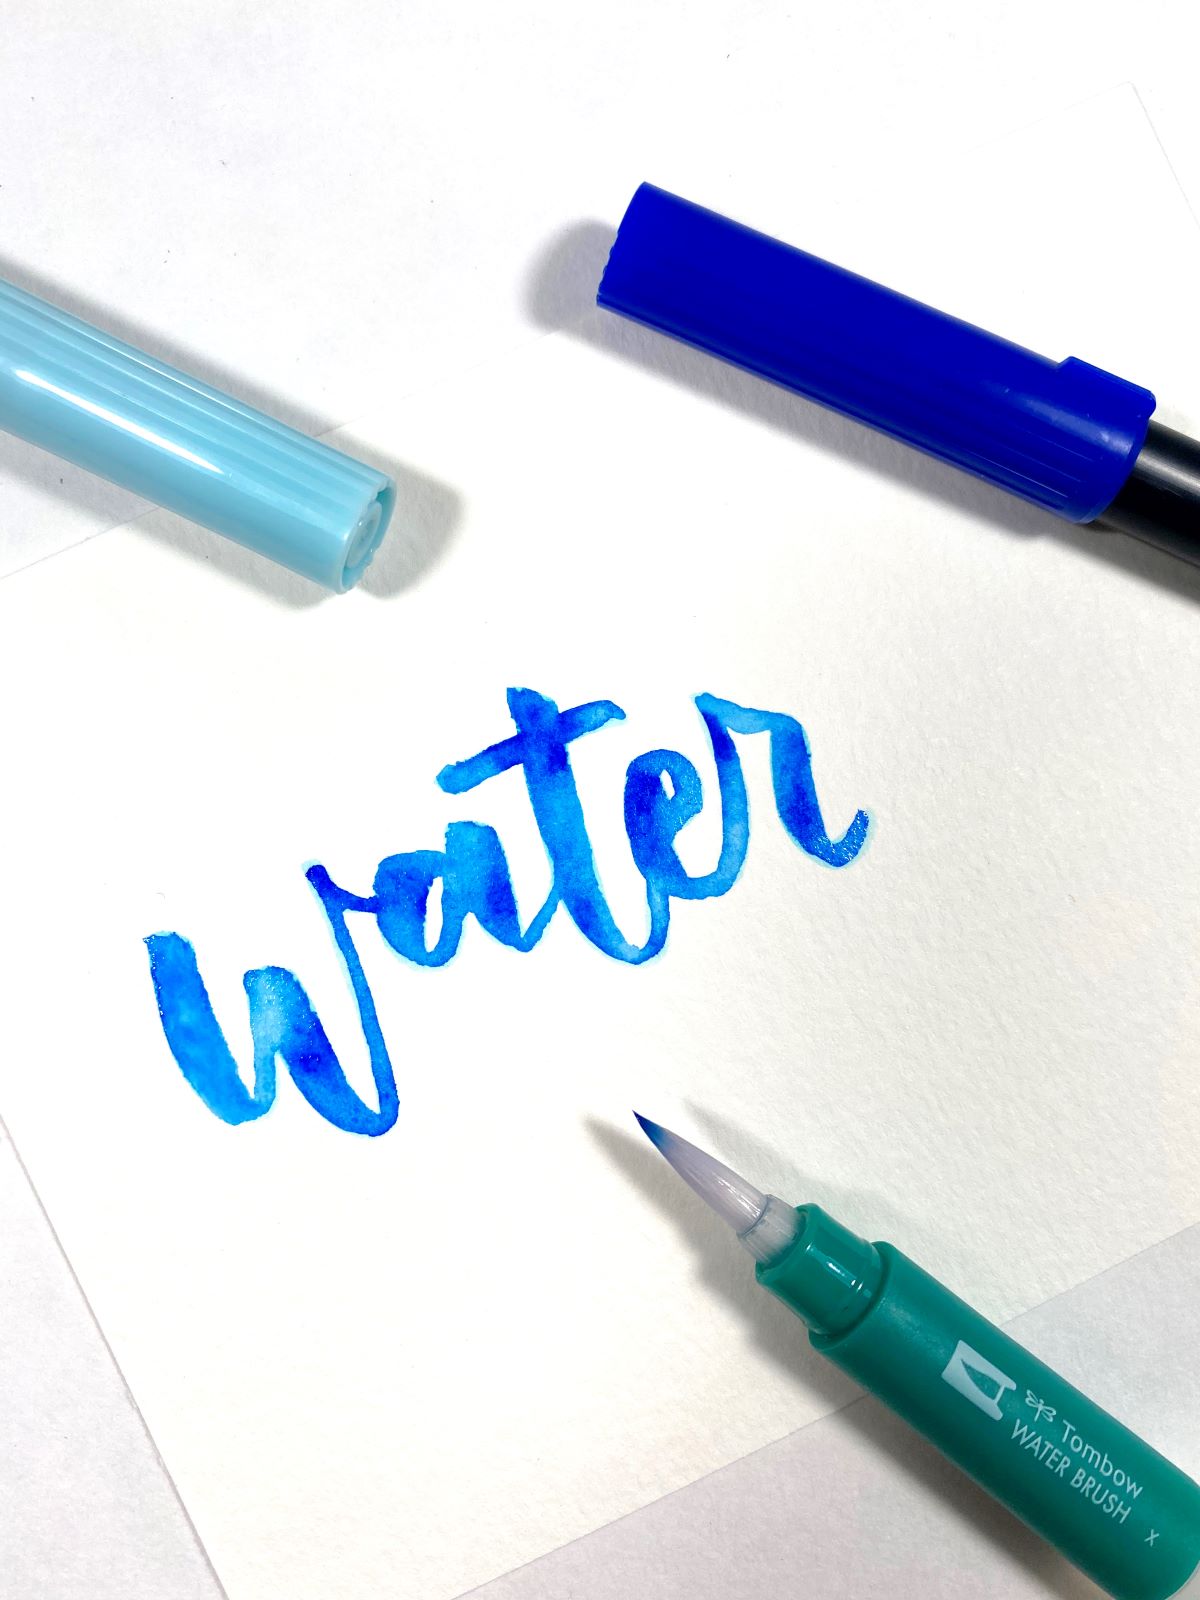 Tombow Brush Lettering Tutorial: How to Blend Tombow Markers - Persia Lou